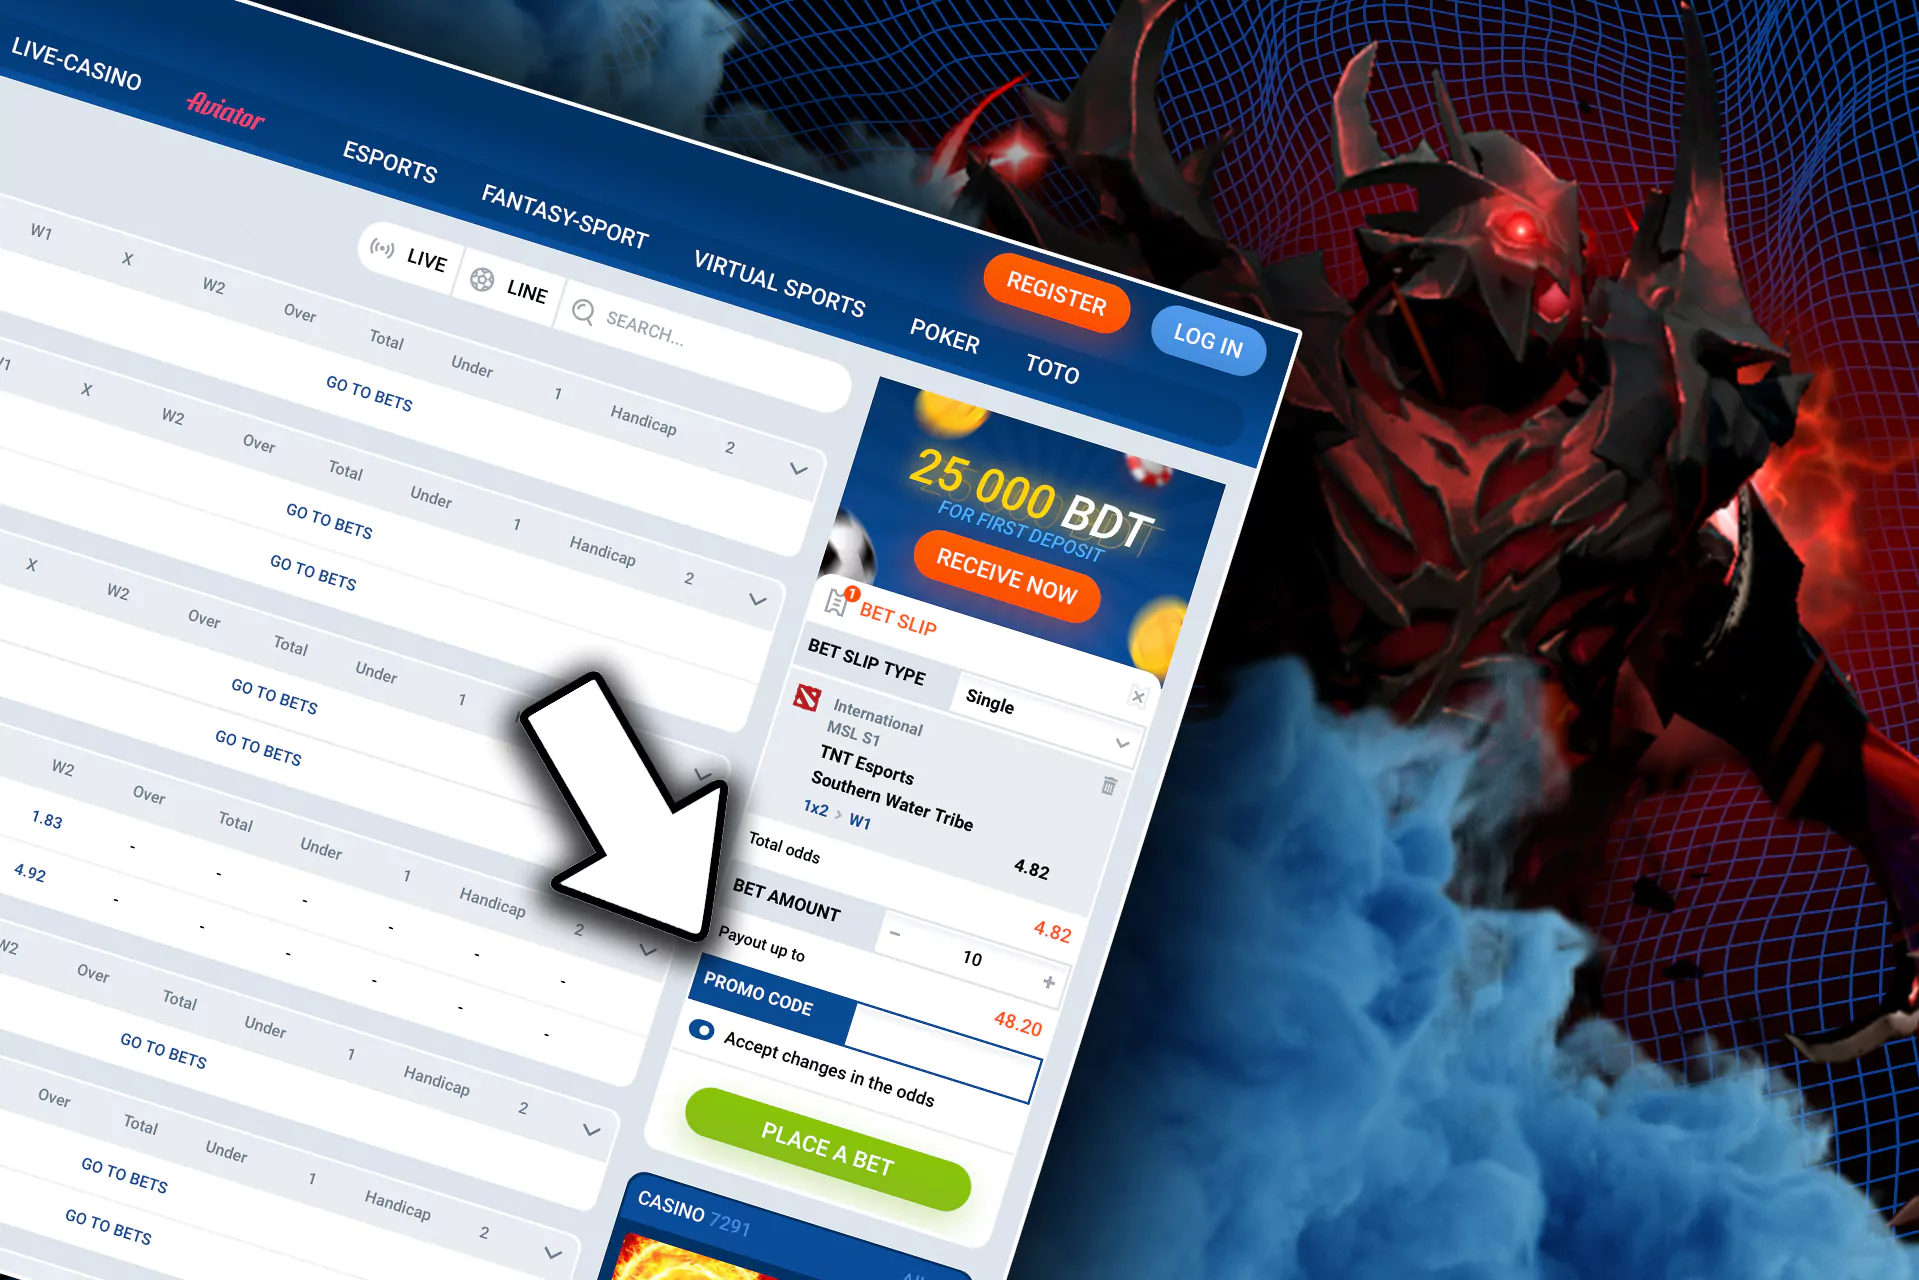 The promo code gives you an additional bonus for betting on esports.